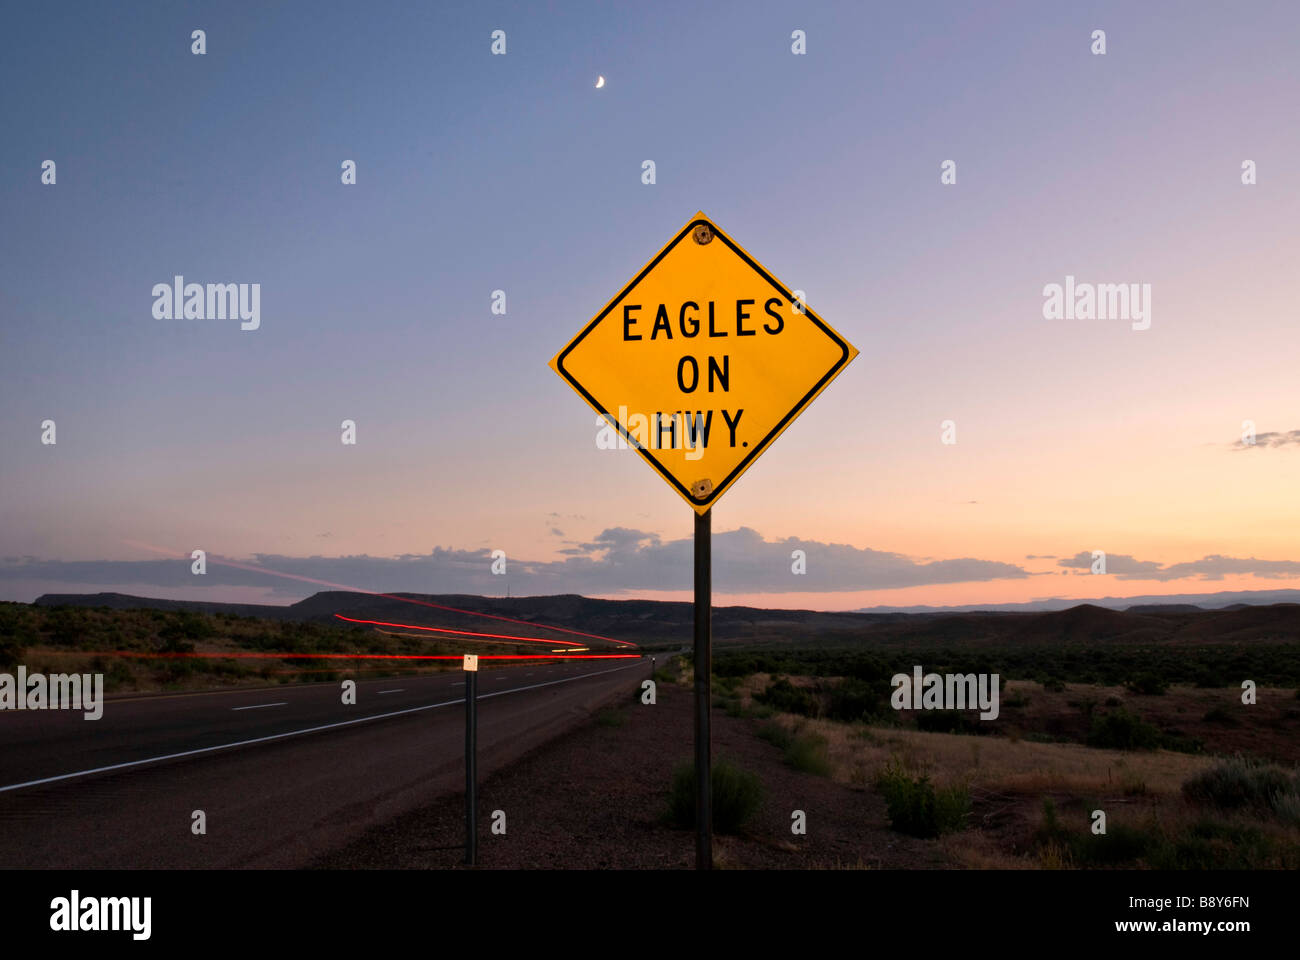 Eagles on Highway sign at the roadside, Interstate 70, Utah, USA Stock Photo